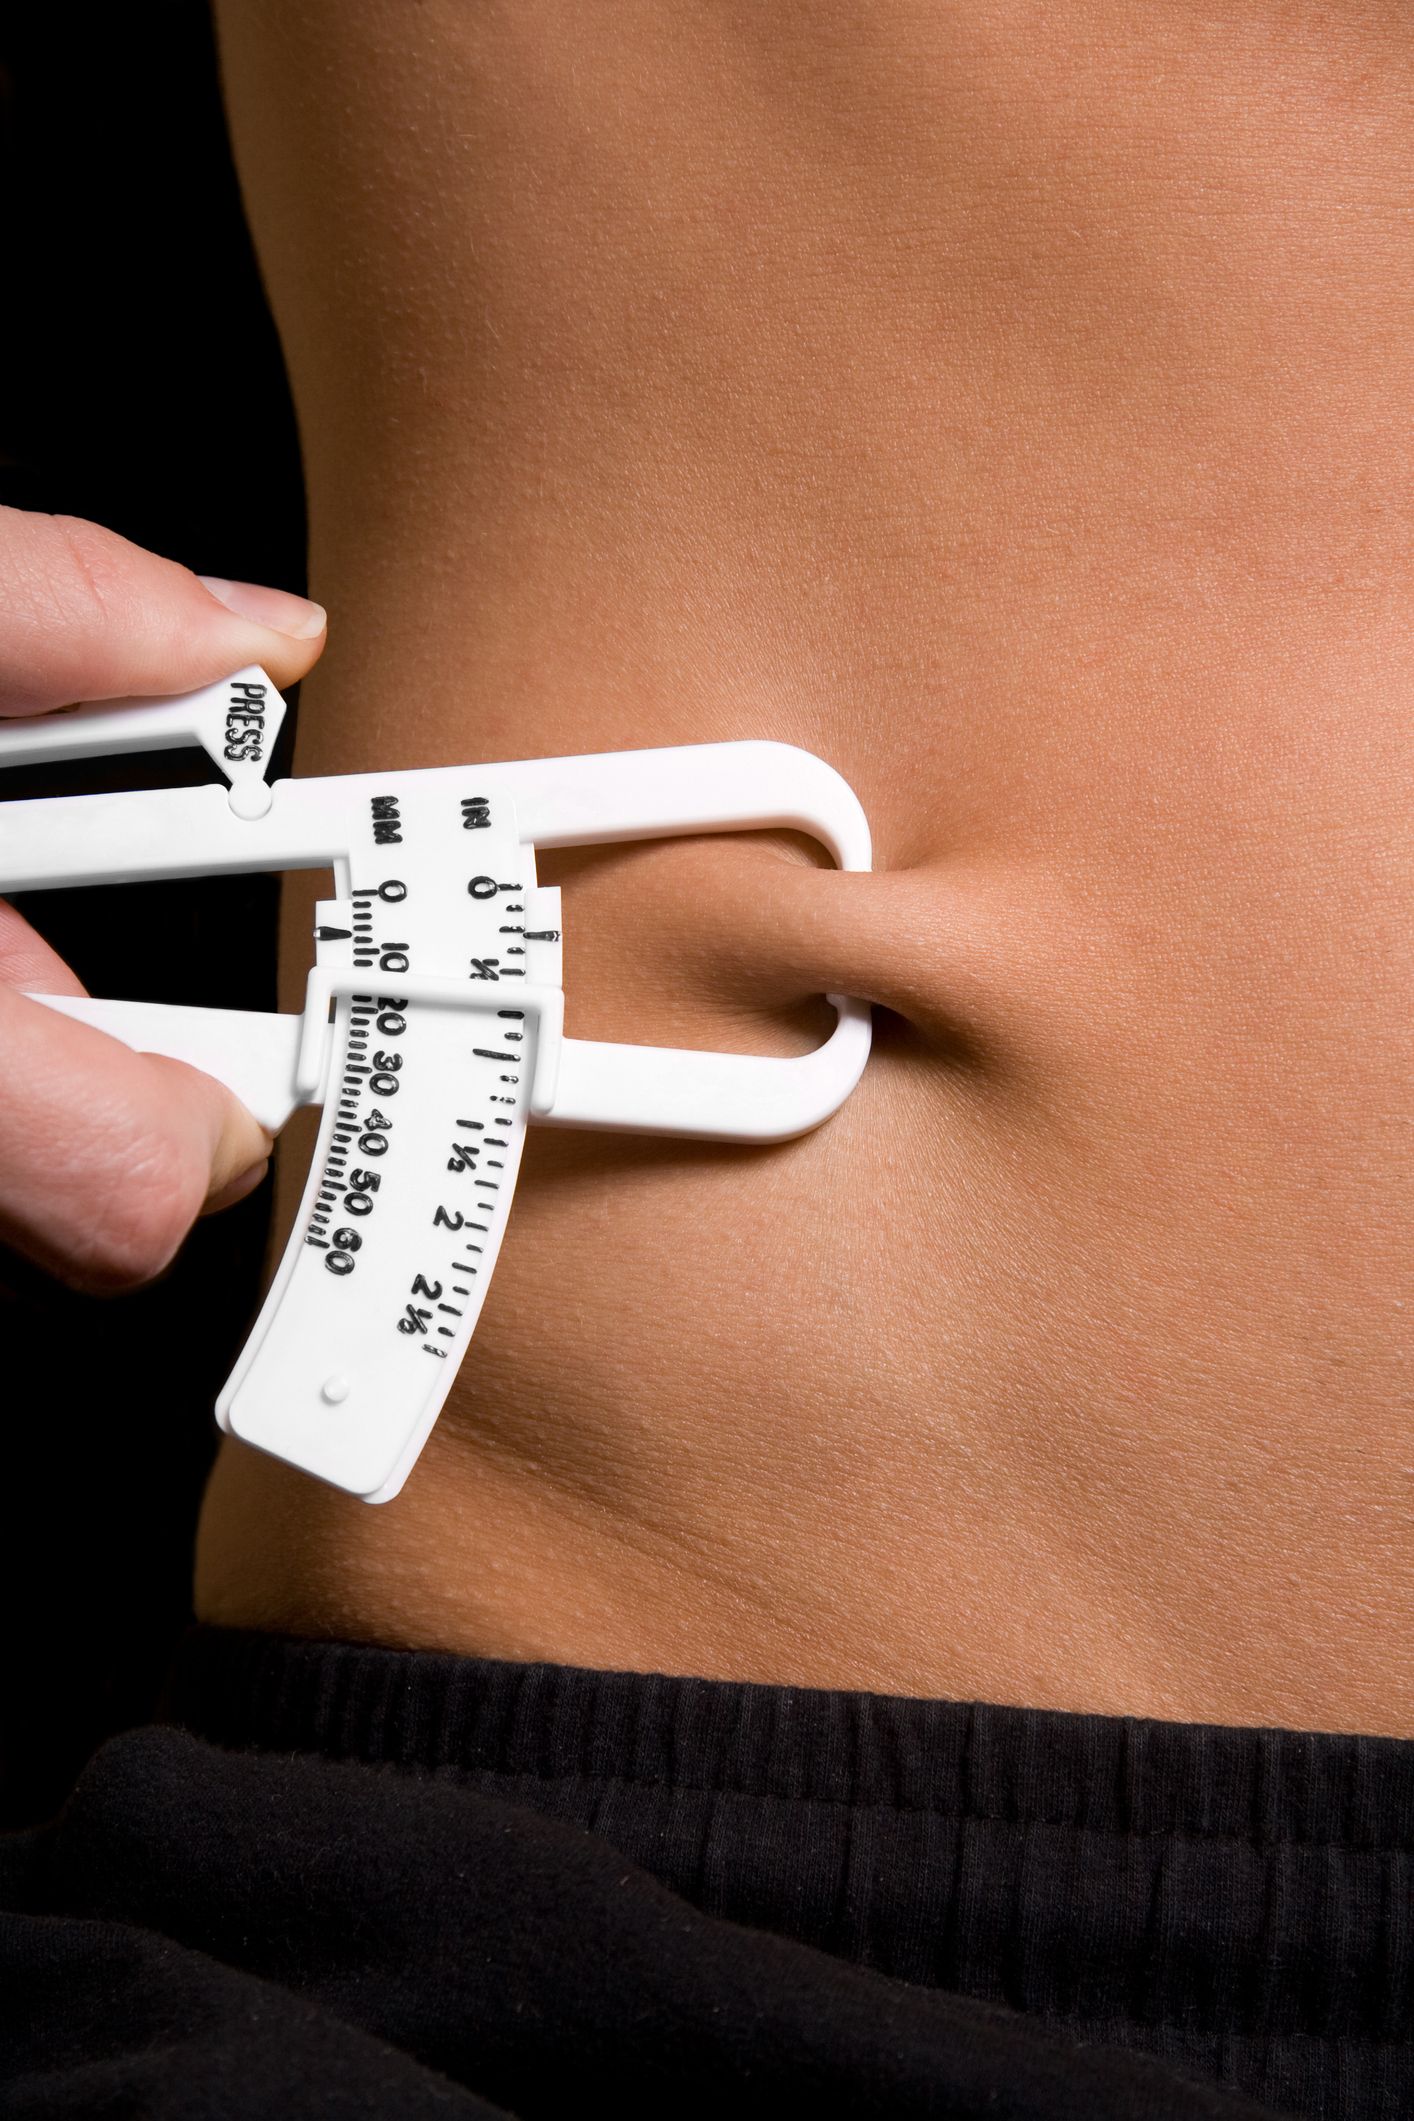 Body fat test types : which is the most accurate body fat test and